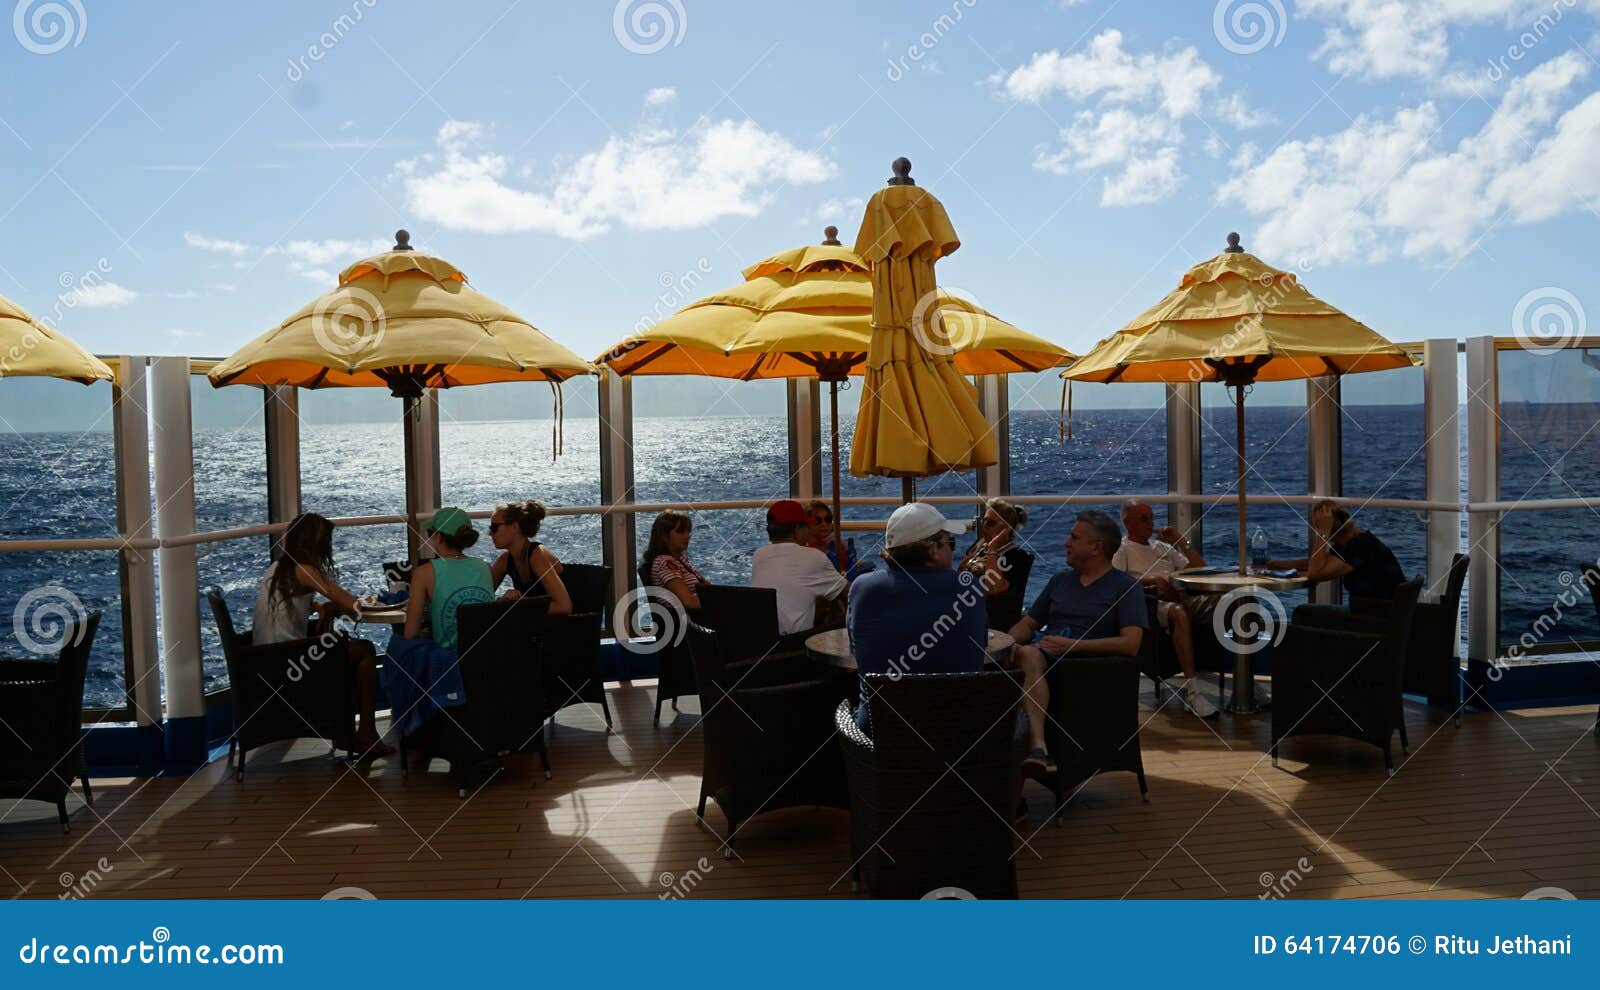 Carnival Breeze Cruise Ship Editorial Photo Image Of